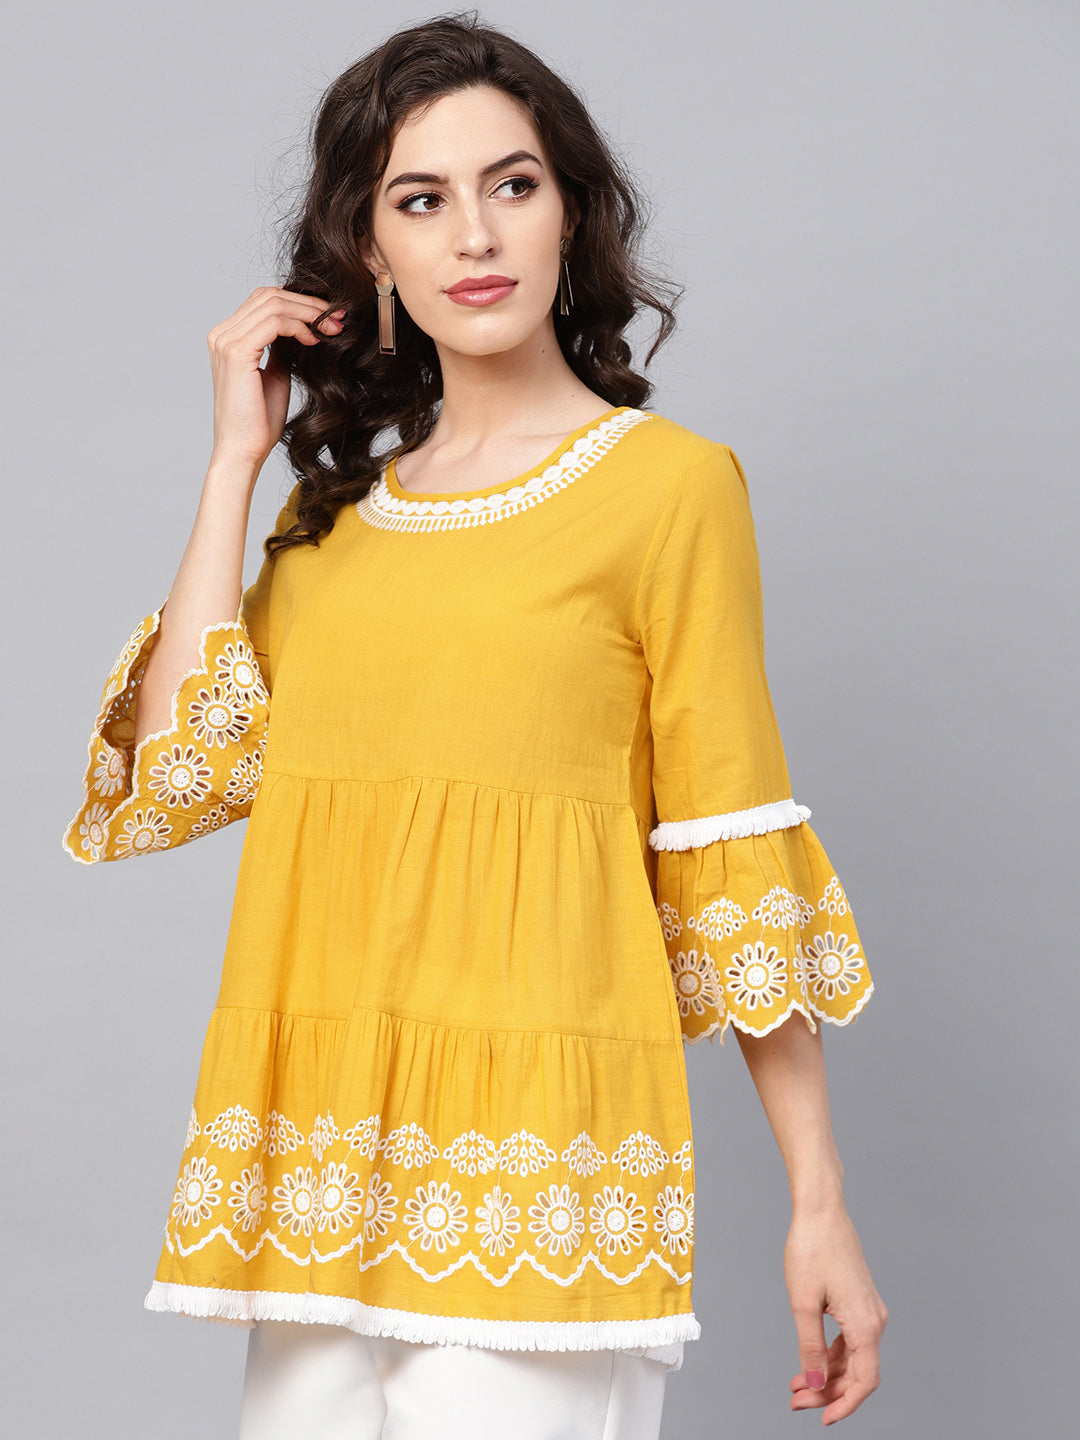 Bhama Couture Mustard Yellow & White Embroidered Cotton Top